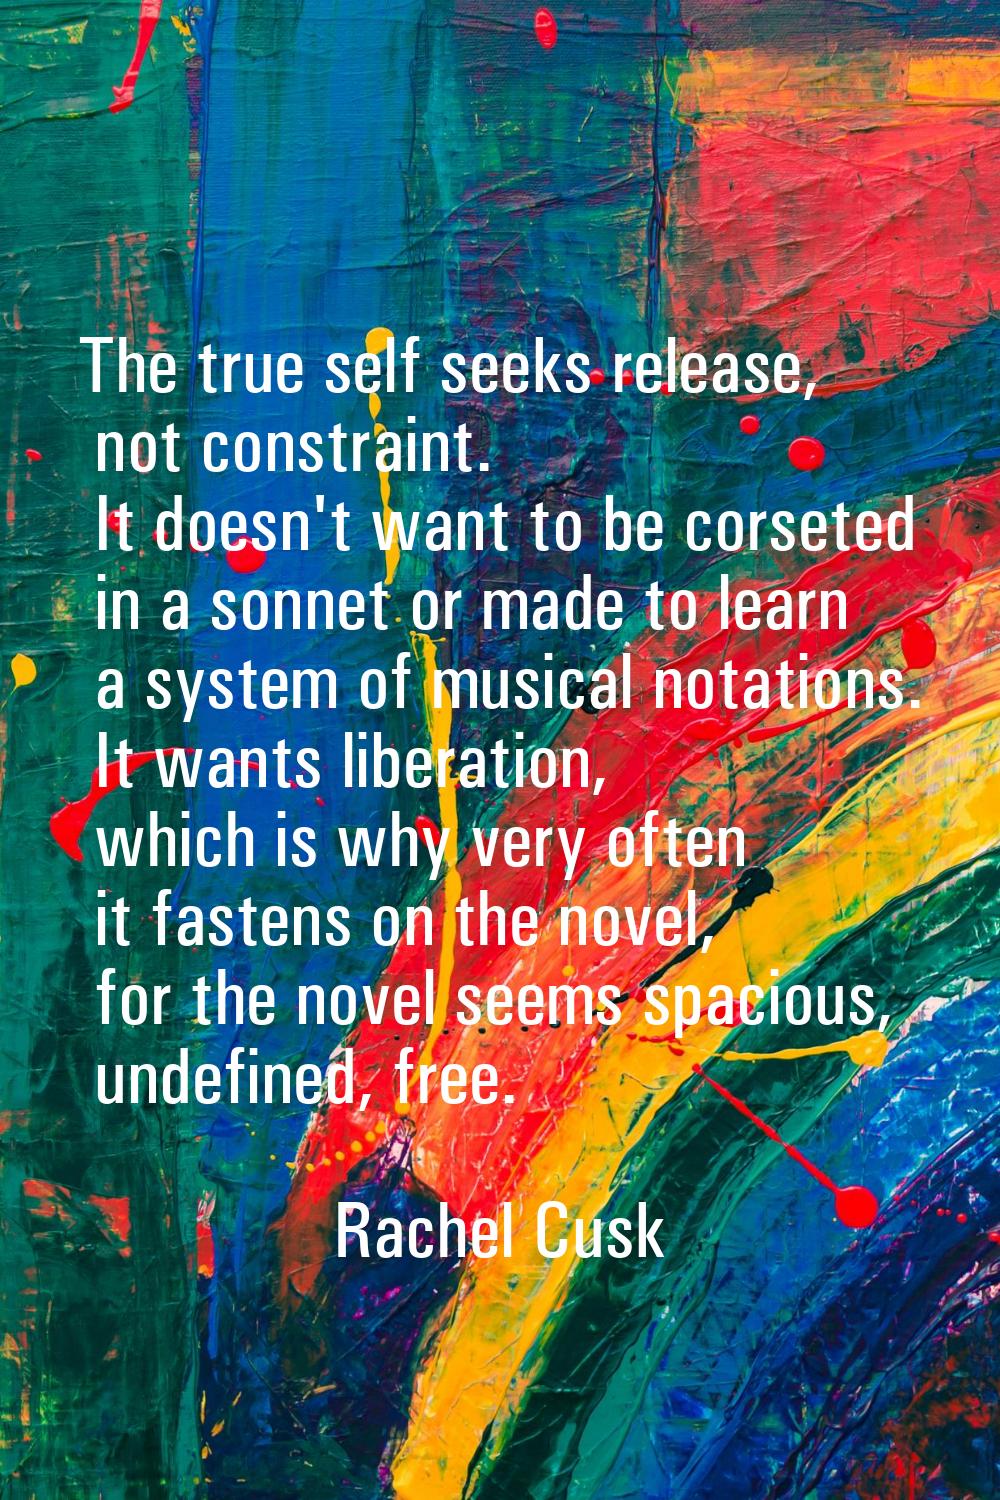 The true self seeks release, not constraint. It doesn't want to be corseted in a sonnet or made to 